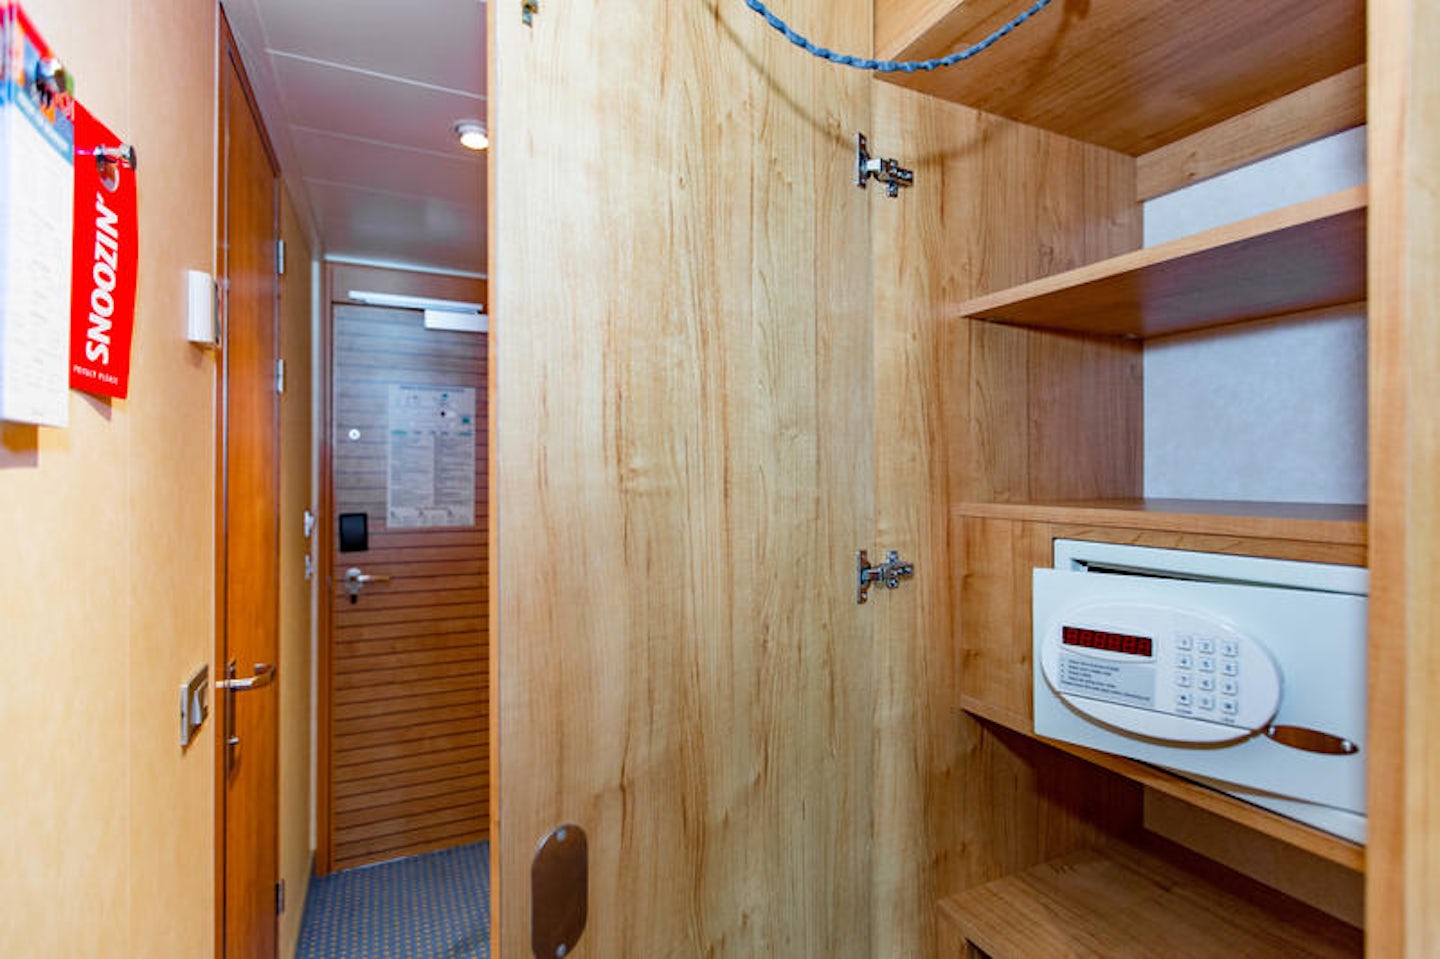 The Deluxe Ocean-View Cabin on Carnival Vista